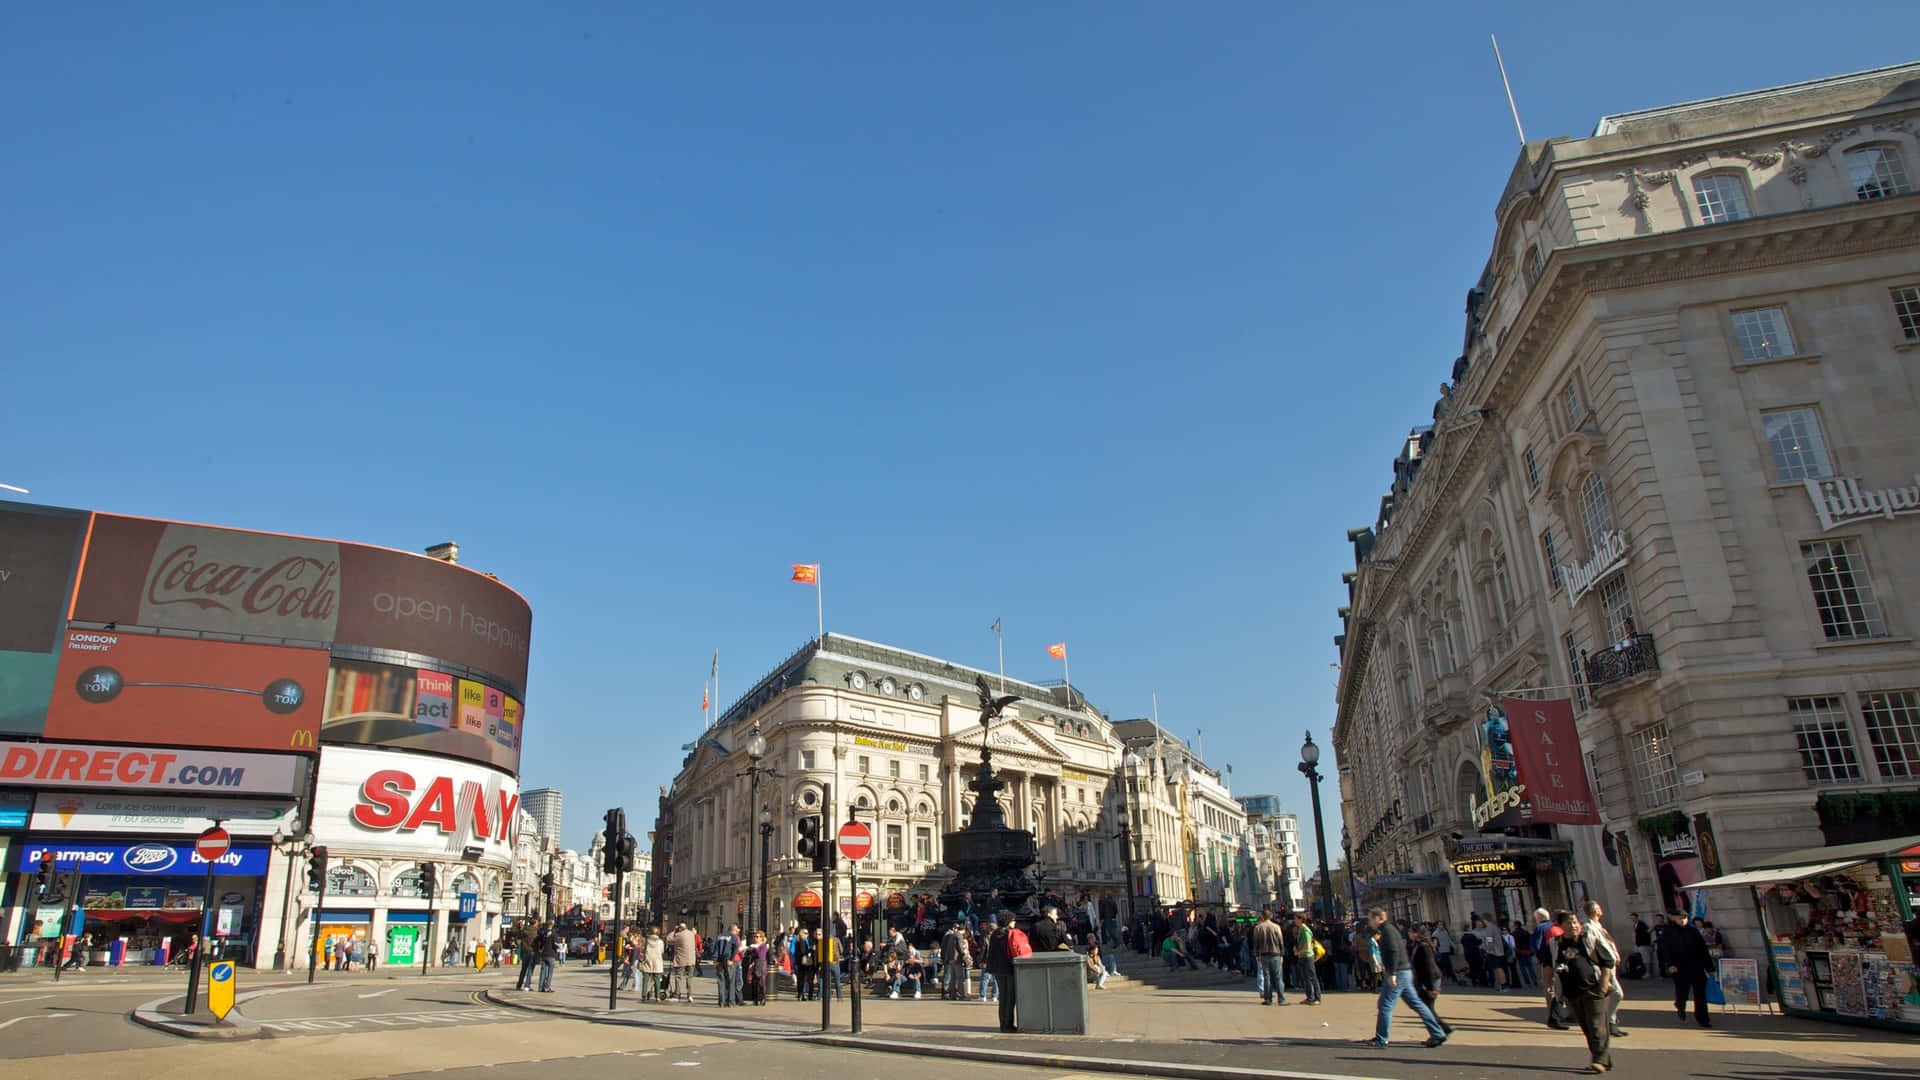 Panoramaansichtdes Piccadilly Circus Wallpaper